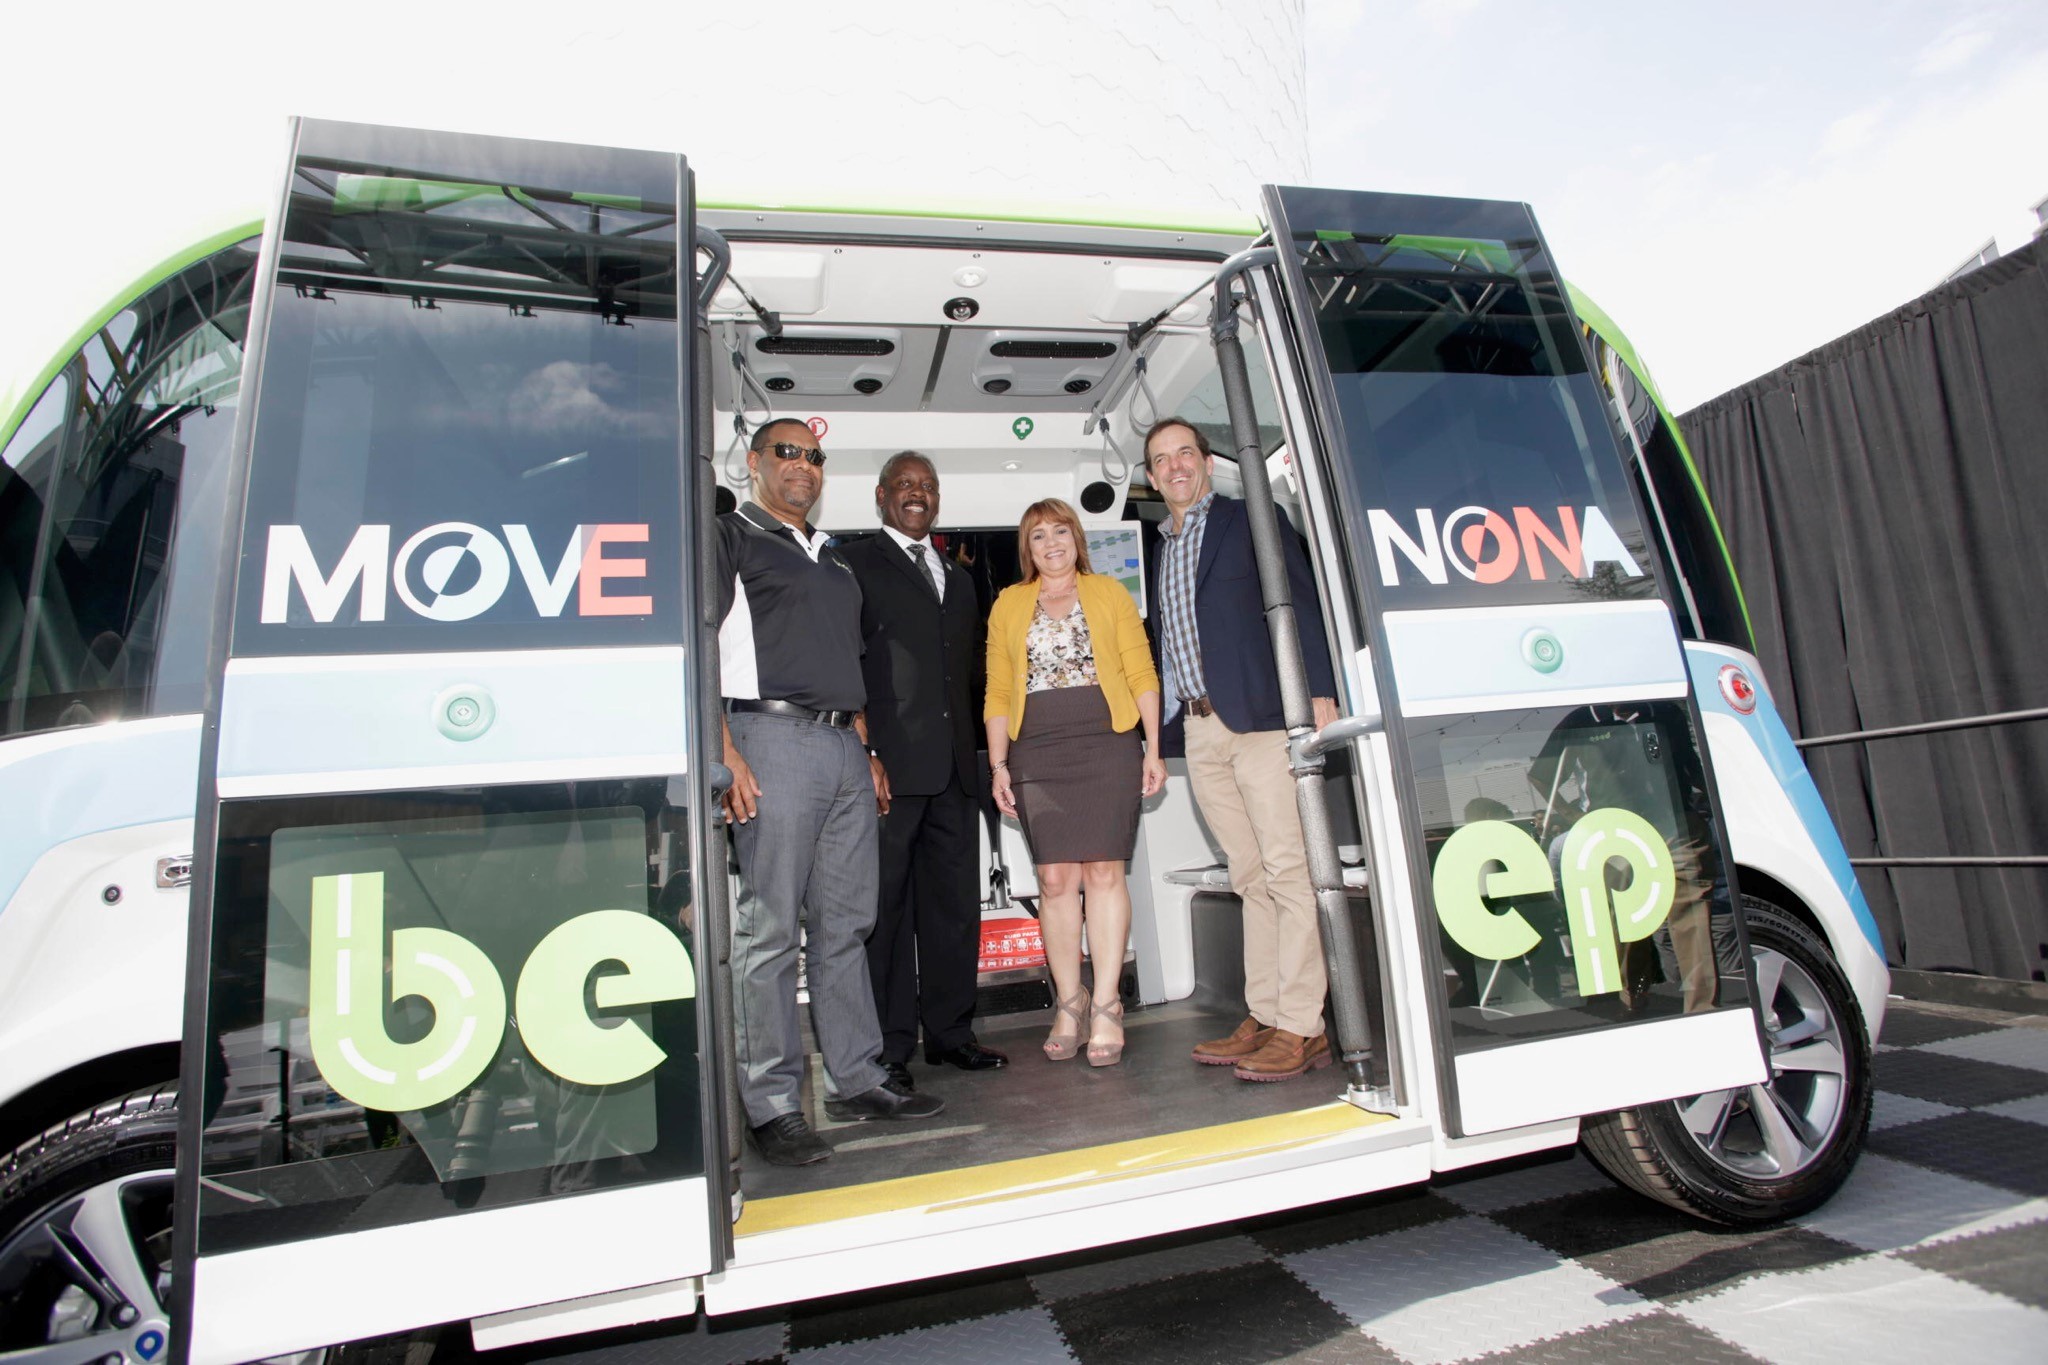 Mayor Demings, Commissioner Gomez Cordero, and two leaders are standing inside an autonomous bus made by Beep.